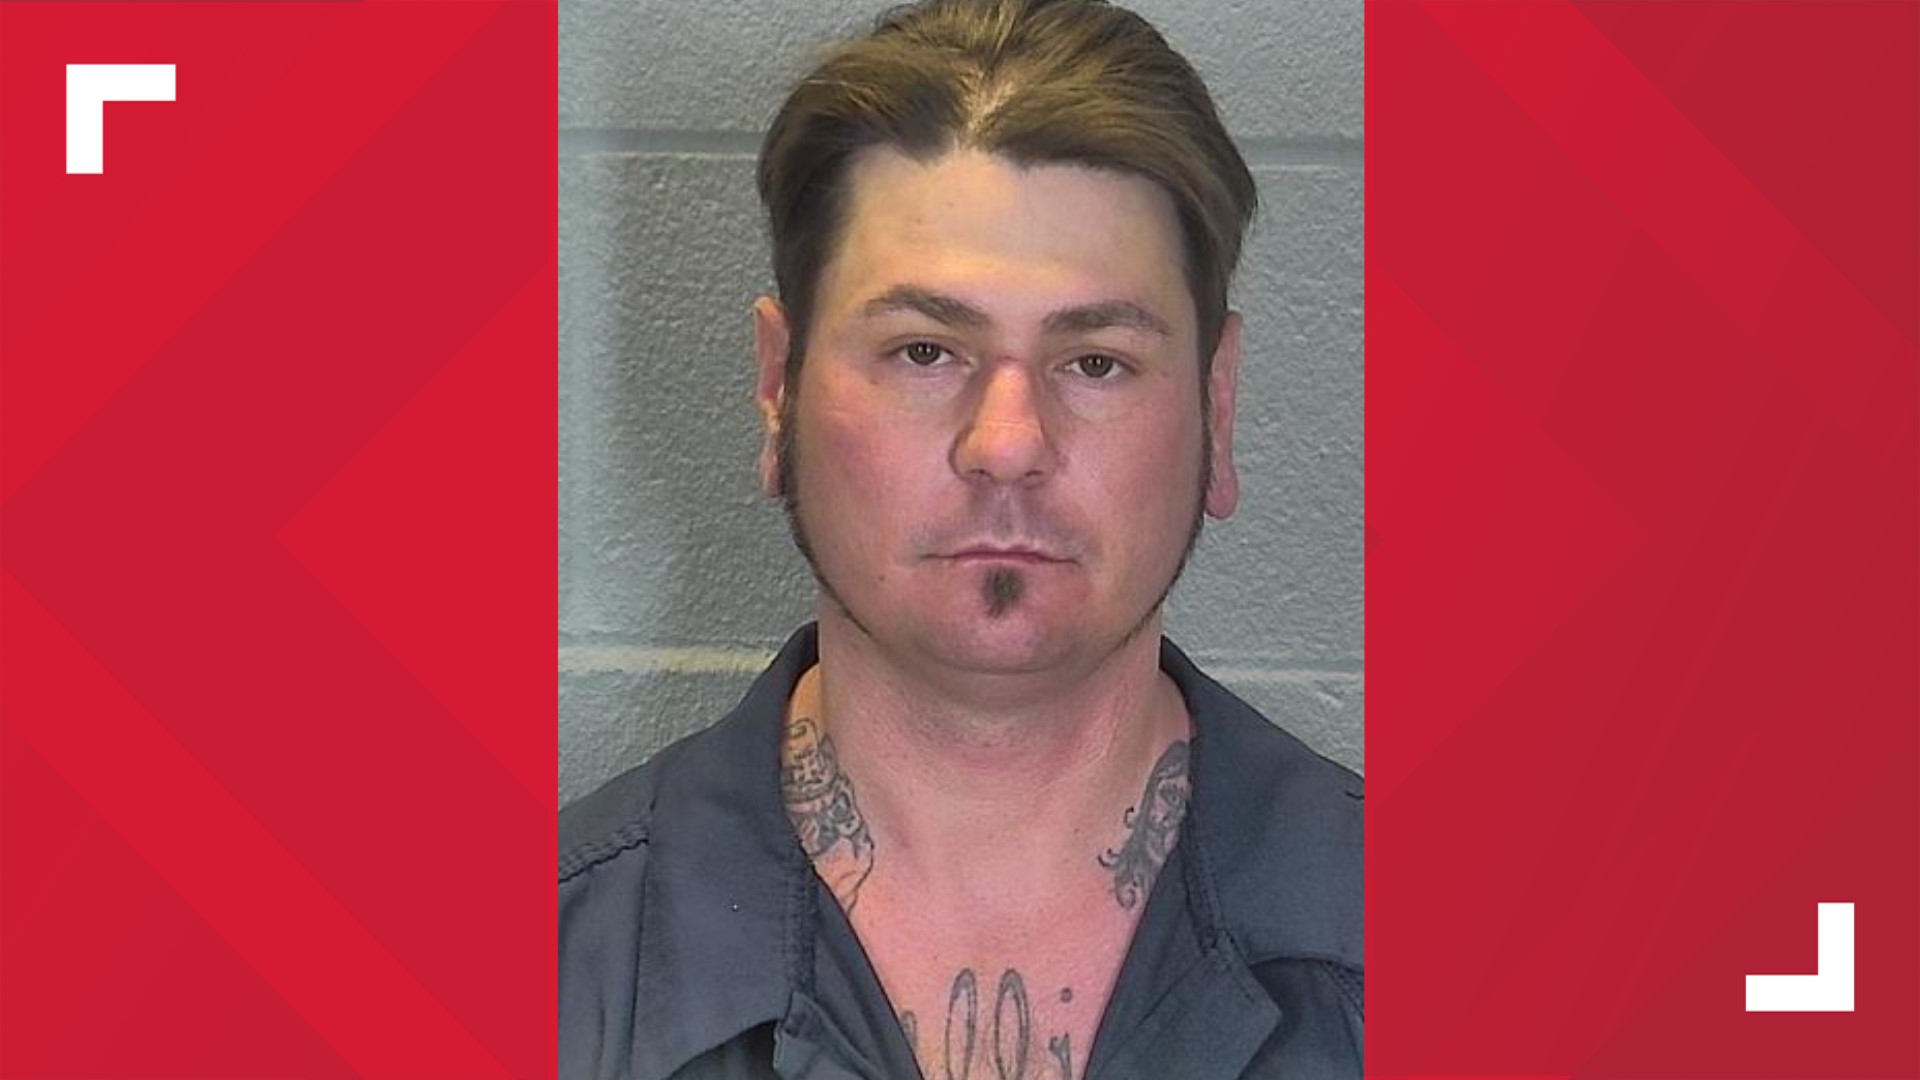 According to court documents, the 9-year-old girl had gone into the home of James Chadwell II on April 19 to pet his dogs and was then attacked by him.